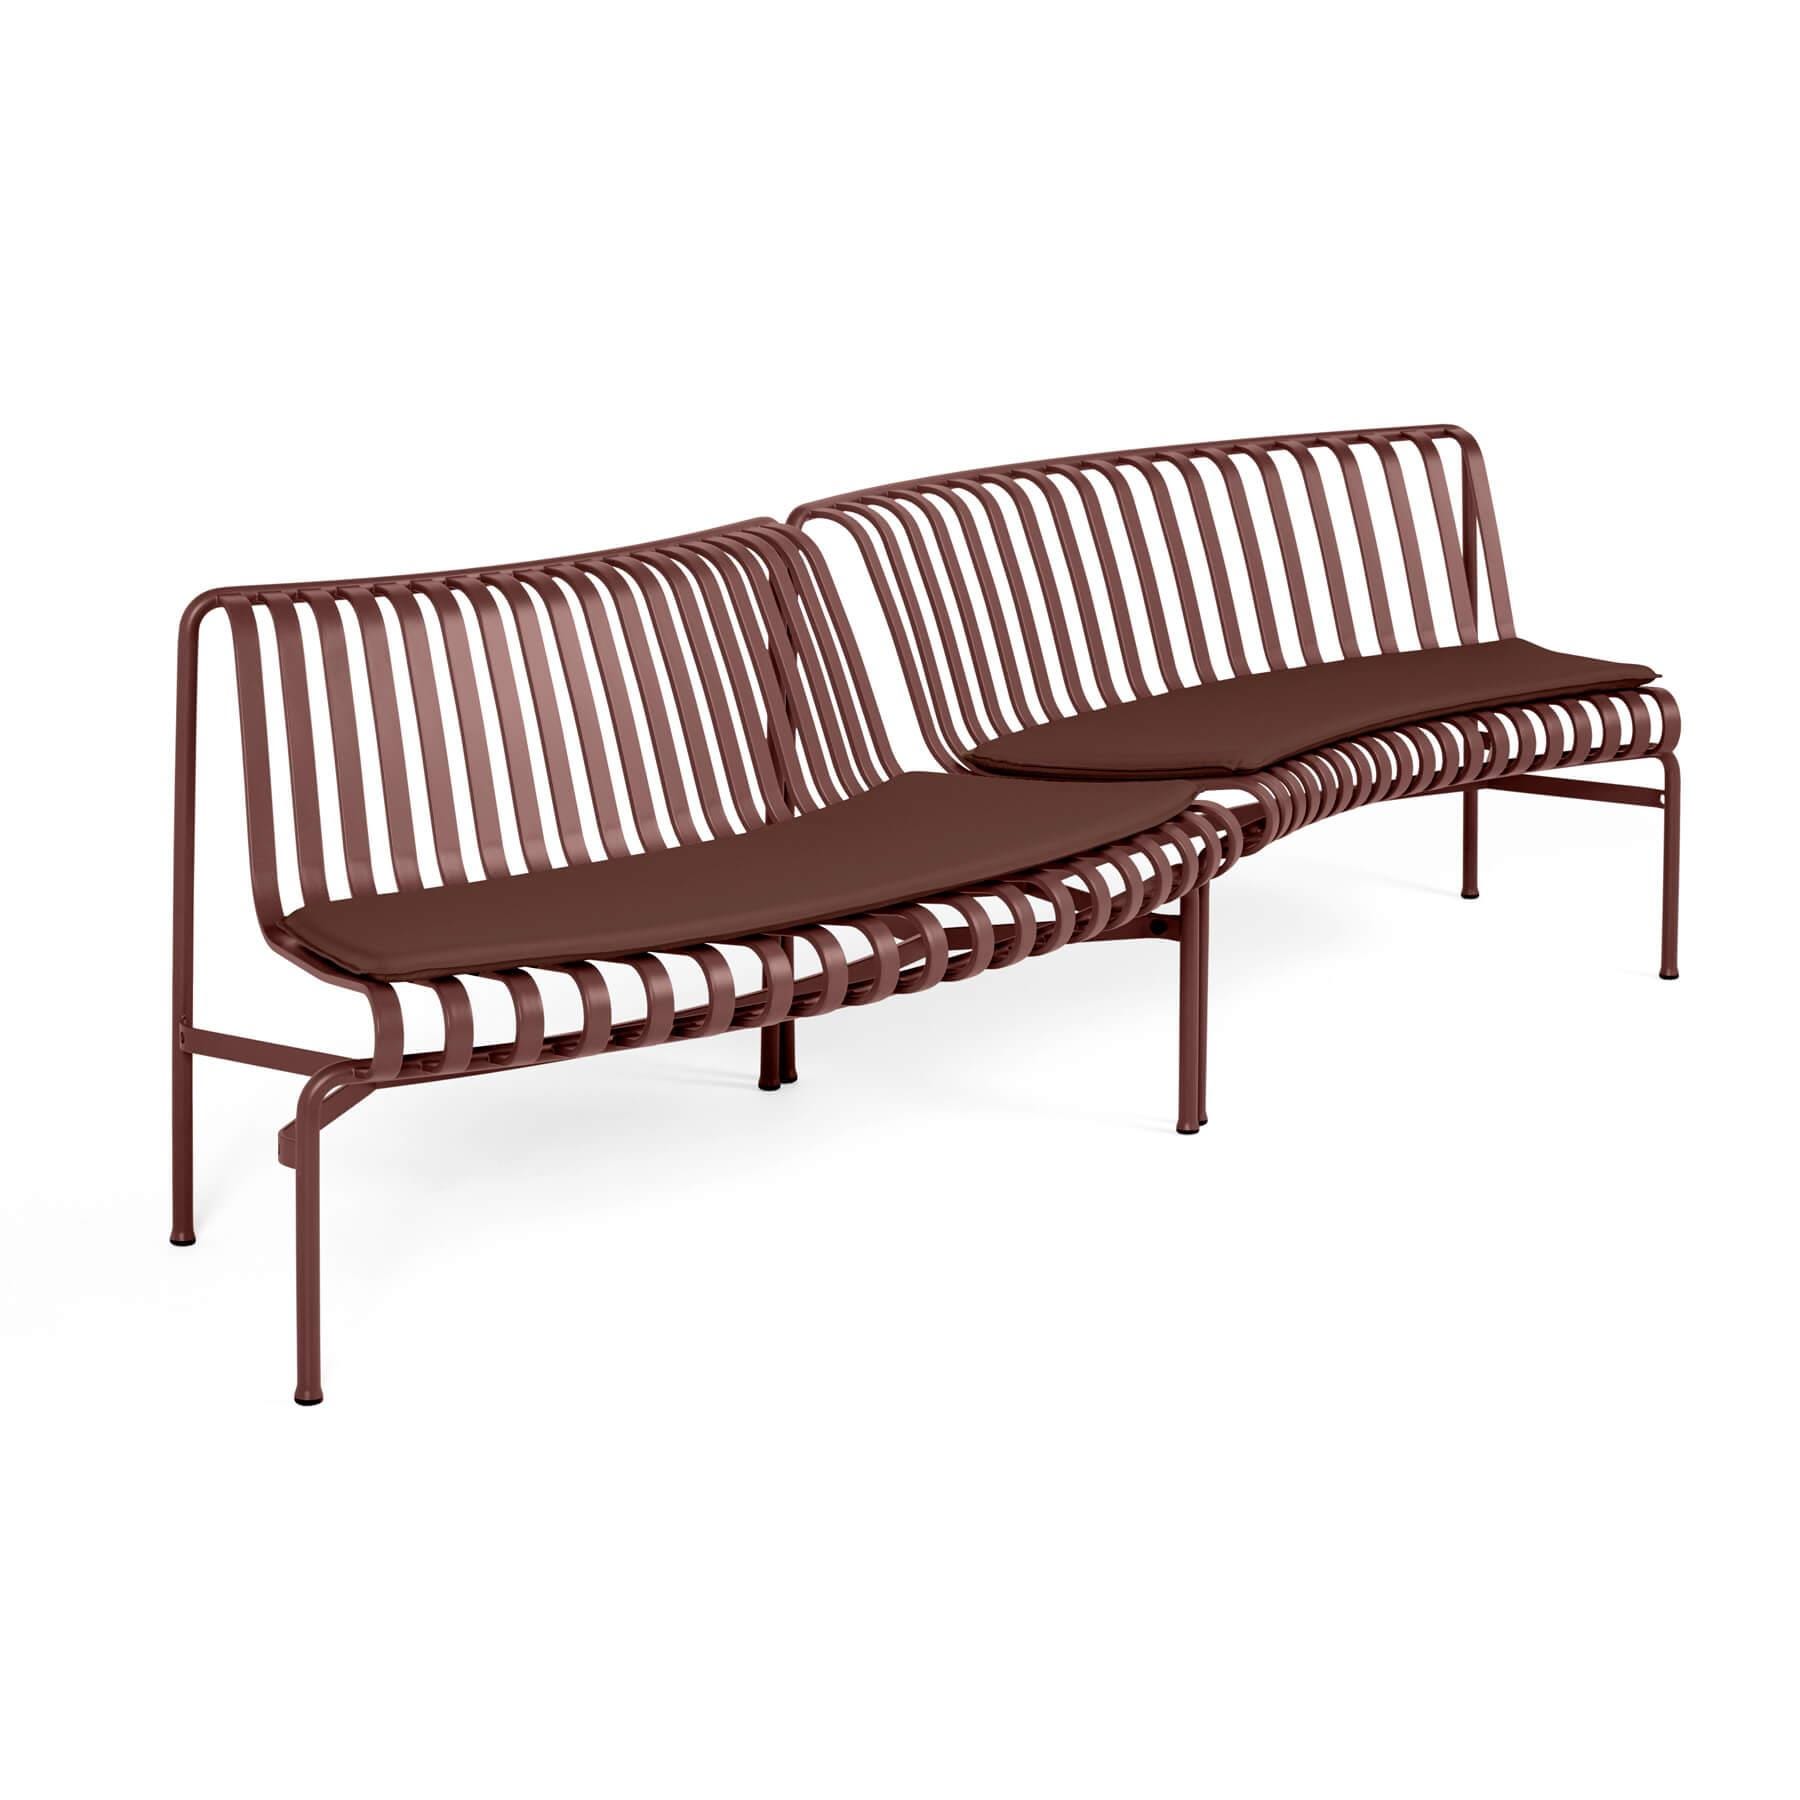 Hay Palissade Park Dining Bench In Out Cushions Iron Red Designer Furniture From Holloways Of Ludlow